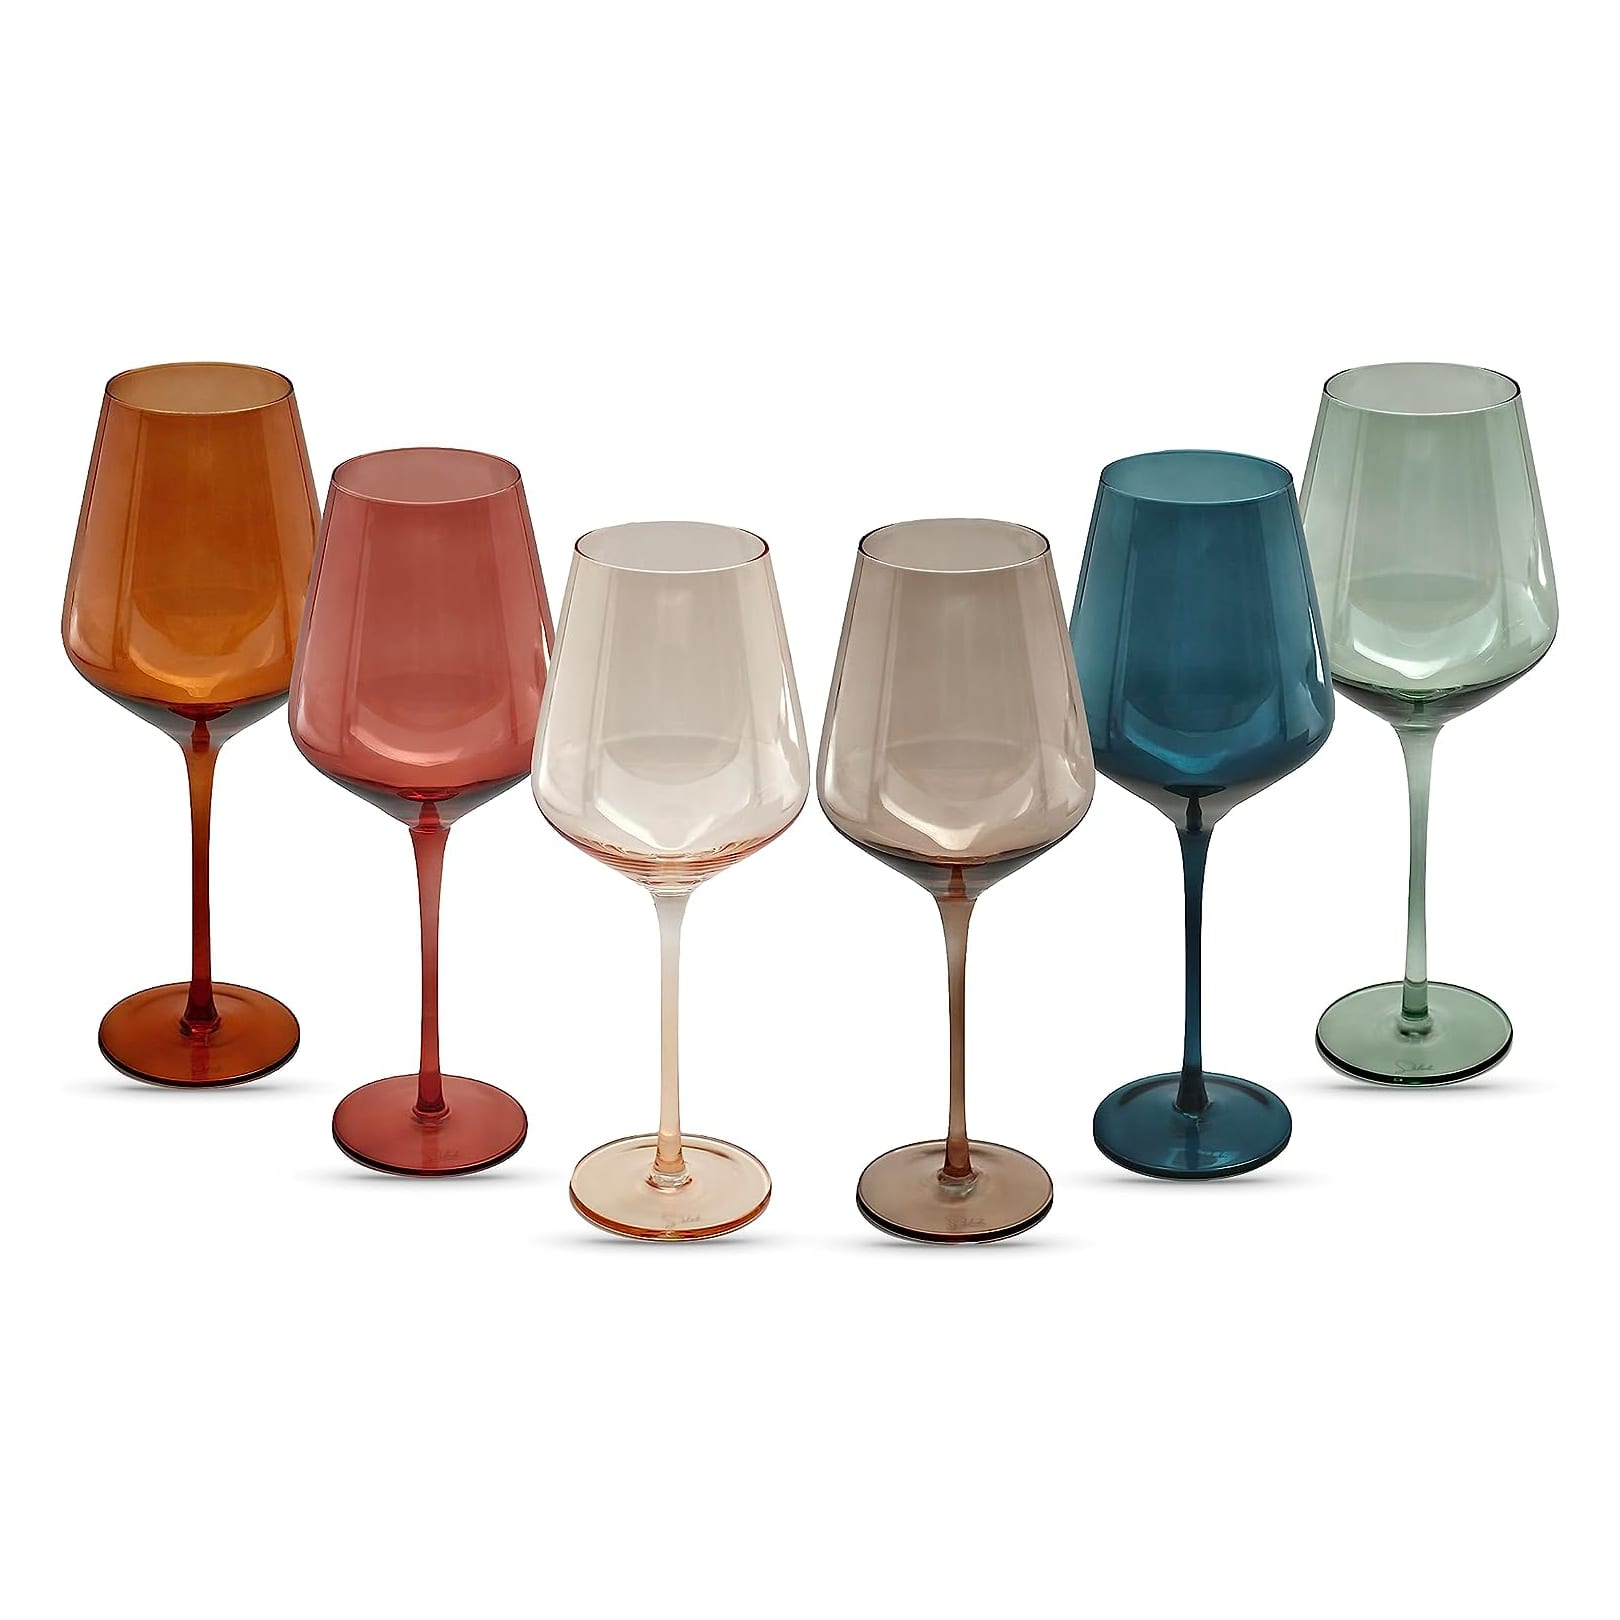 Stemless Colored Wine Glasses, Set of 6 – Clever Girl